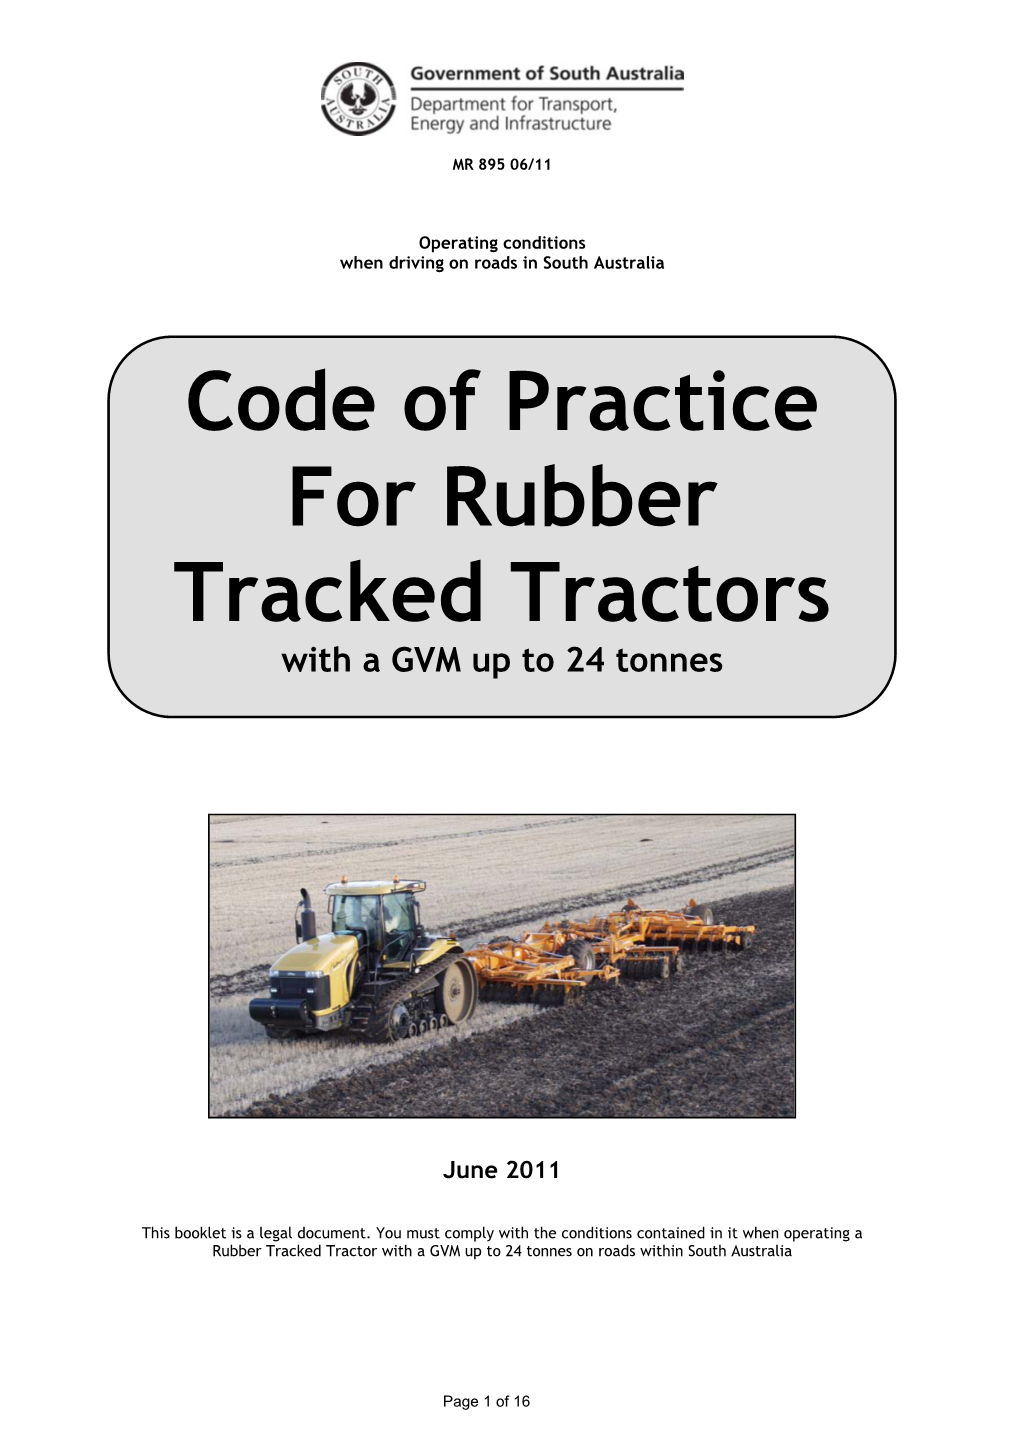 Code of Practice for Rubber Tracked Tractors with a Gross Vehicle Mass up to 24 Tonnes